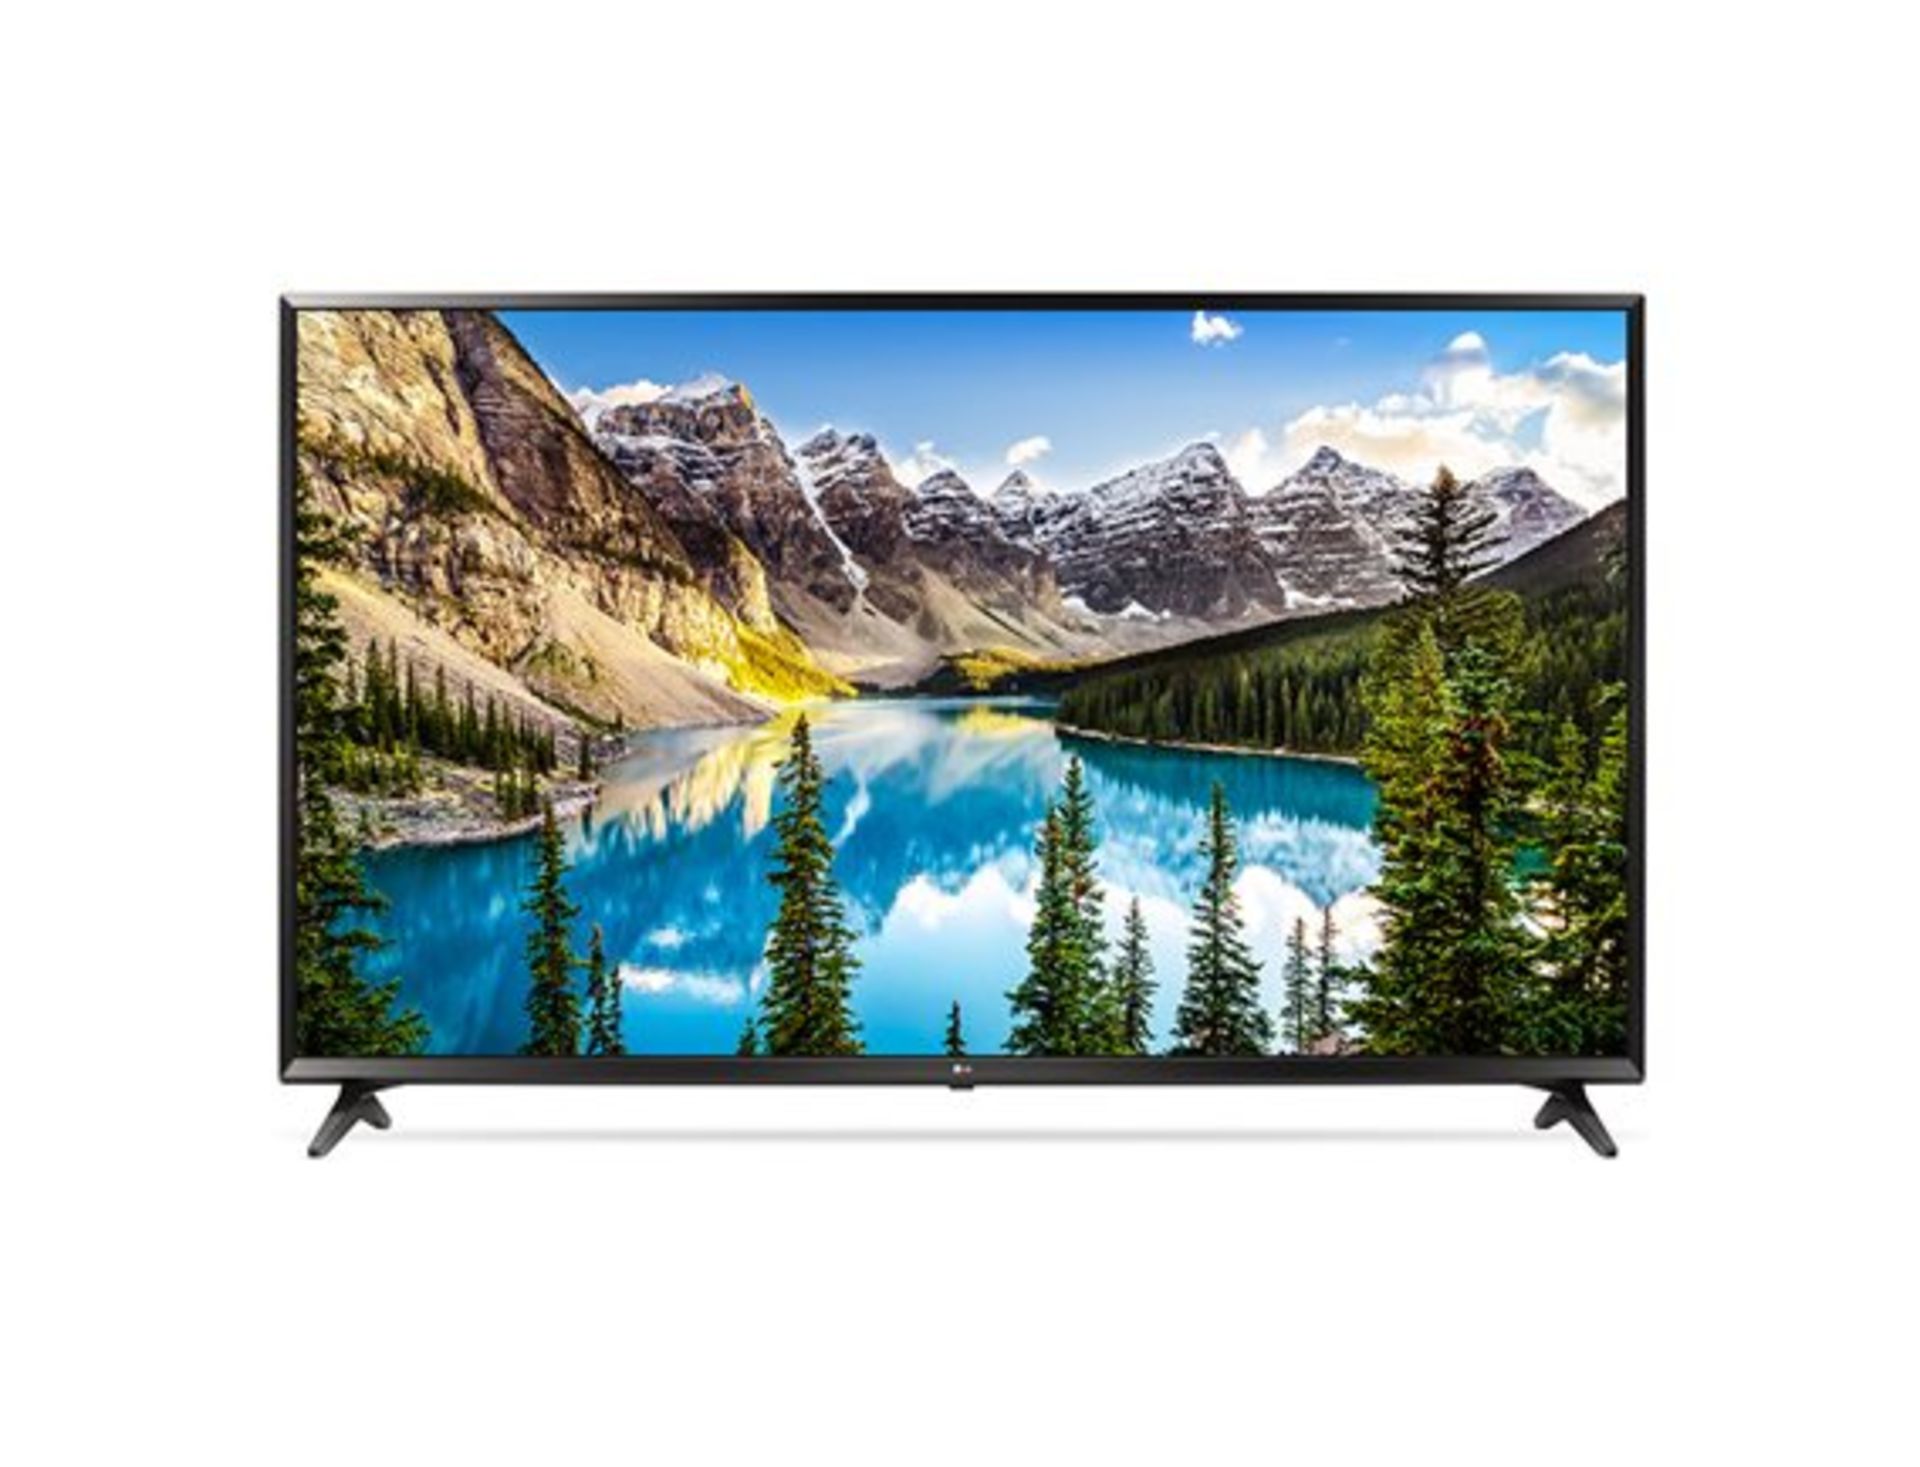 V Brand New LG 49 Inch HDR 4K ULTRA HD LED SMART TV WITH FREEVIEW HD & WEBOS & WIFI 49UJ630V